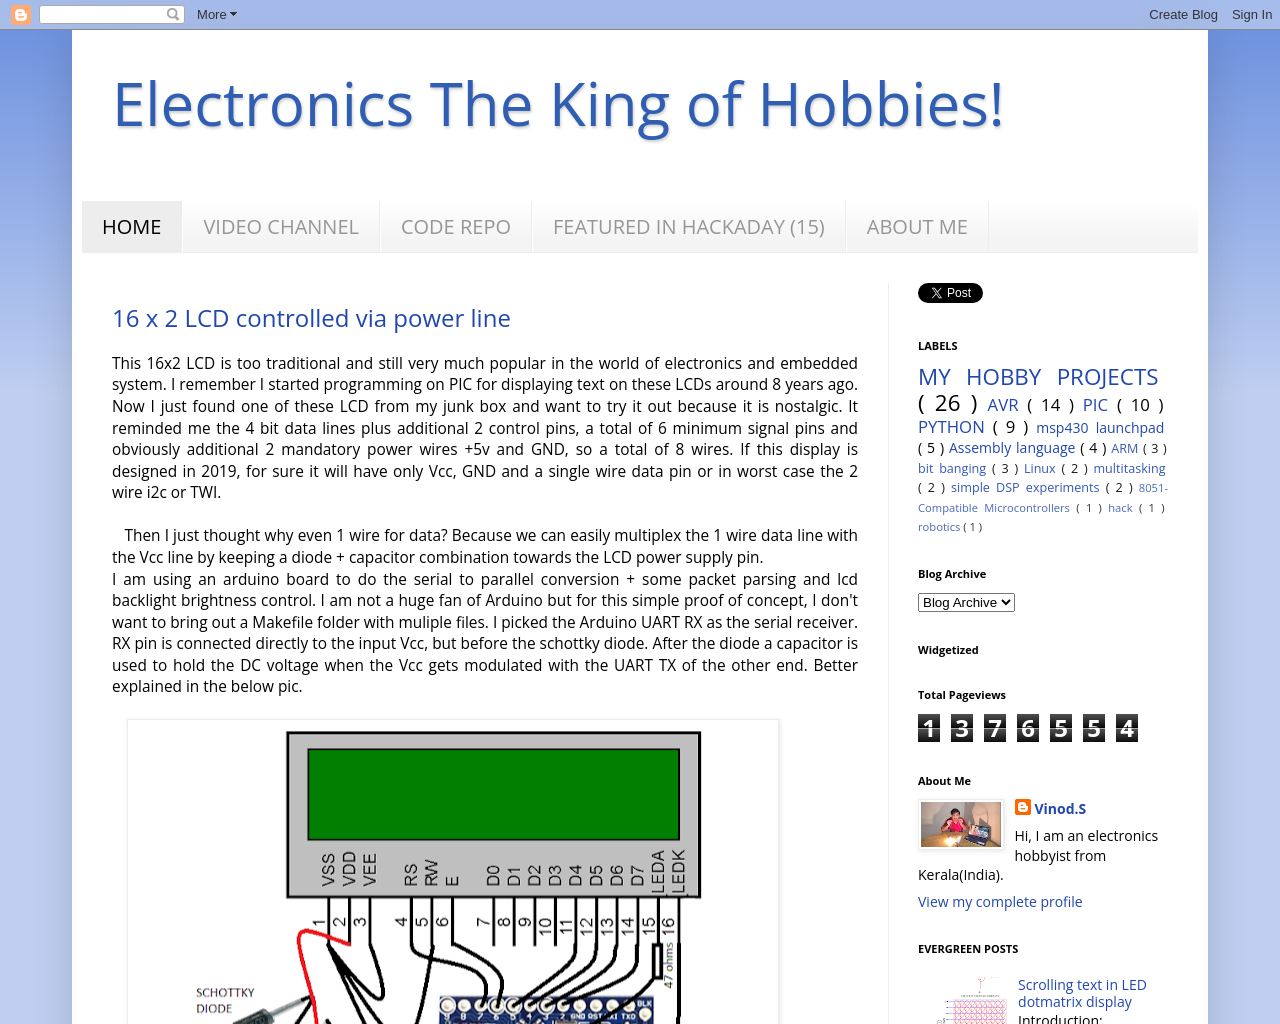 ELECTRONICS THE KING OF HOBBIES